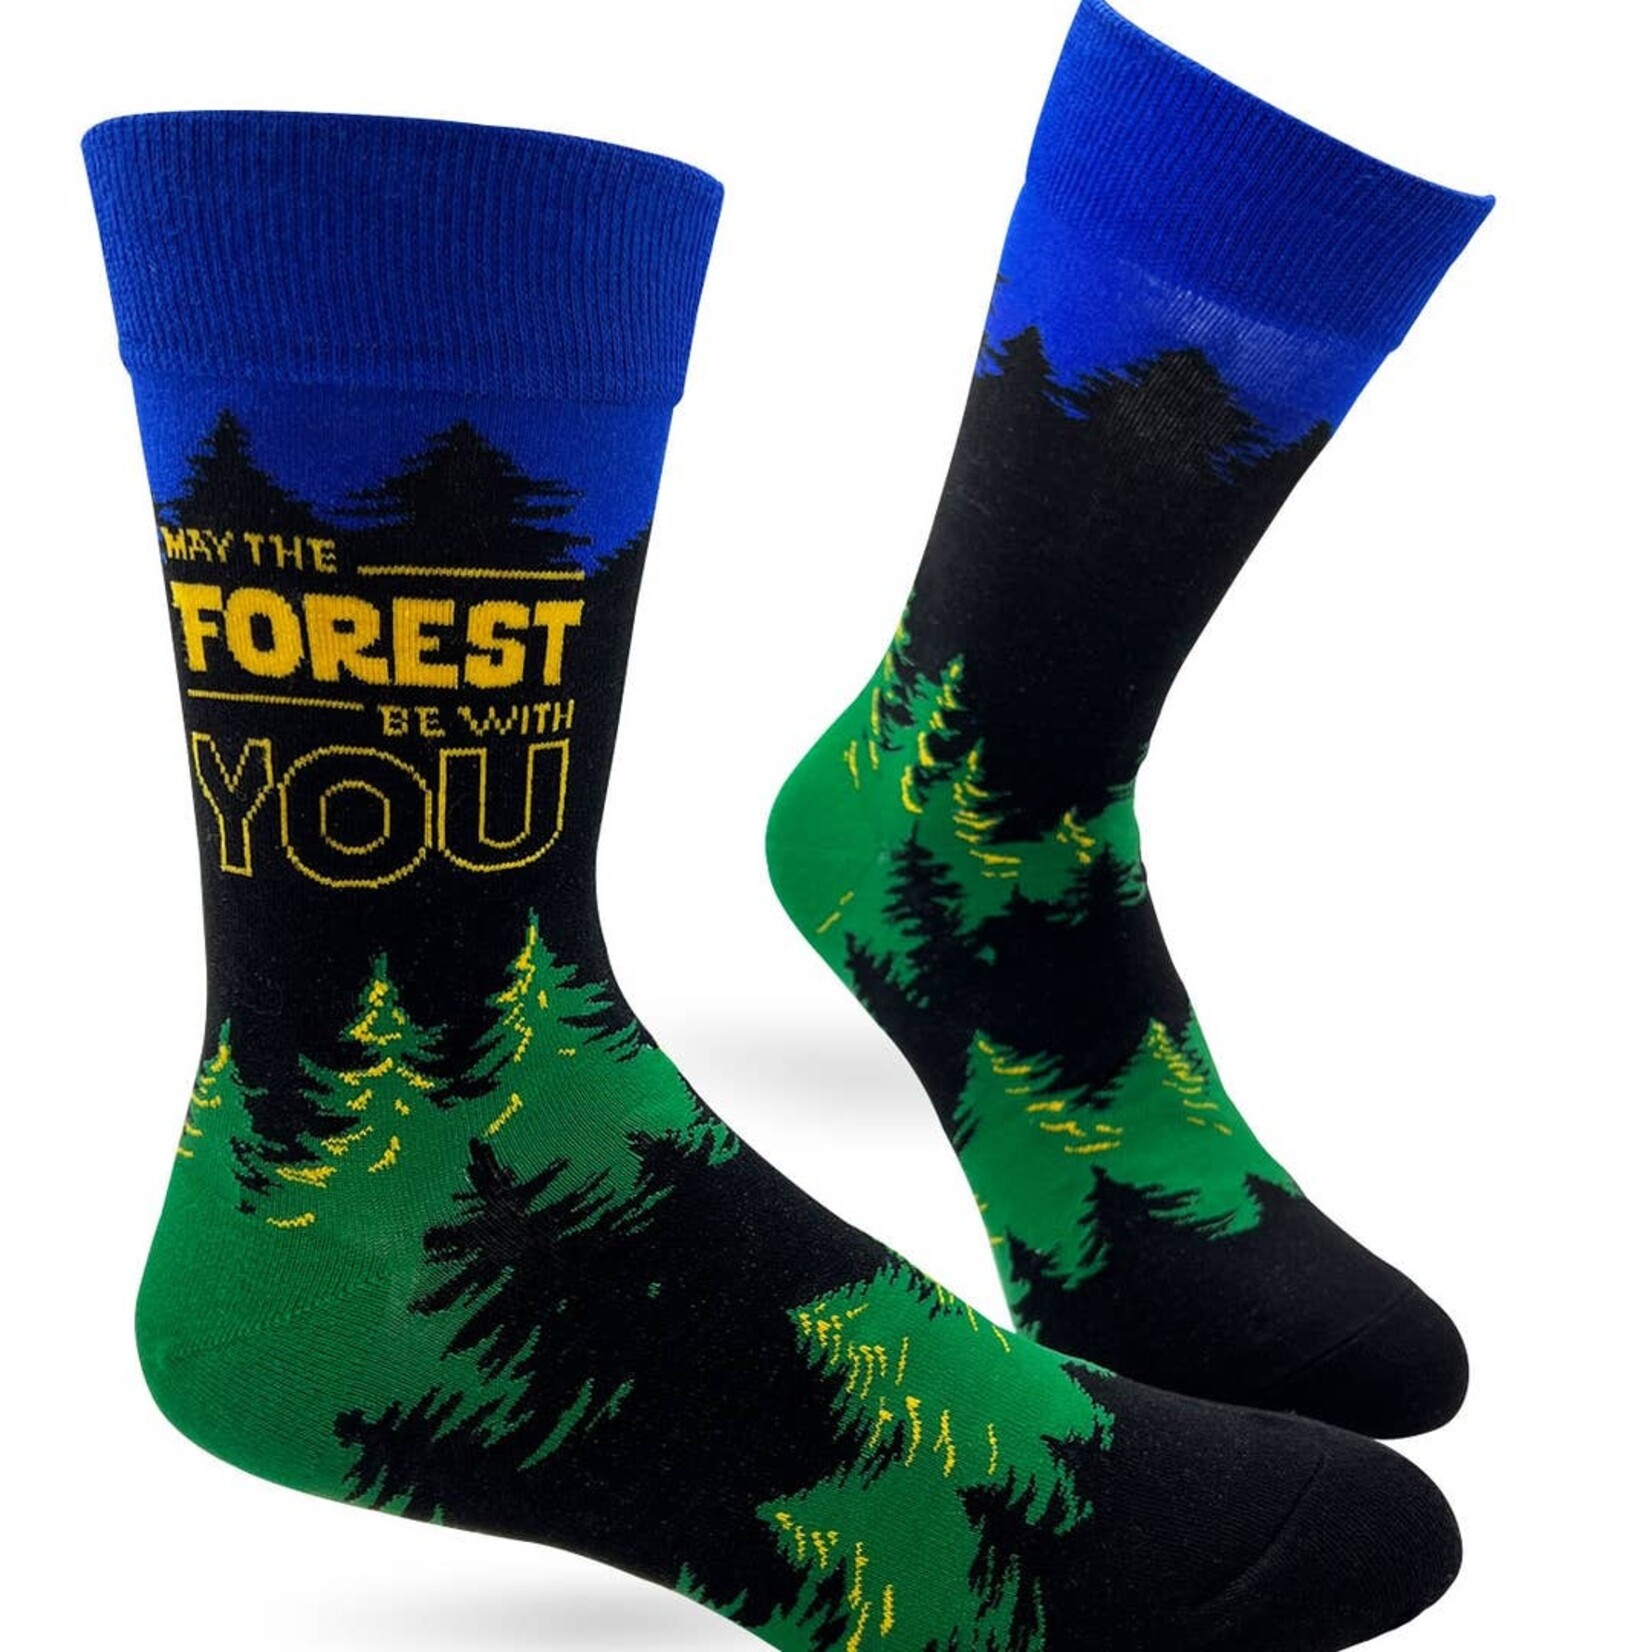 Fabdaz Fabdaz May the Forest Be with You Men's Novelty Crew Socks